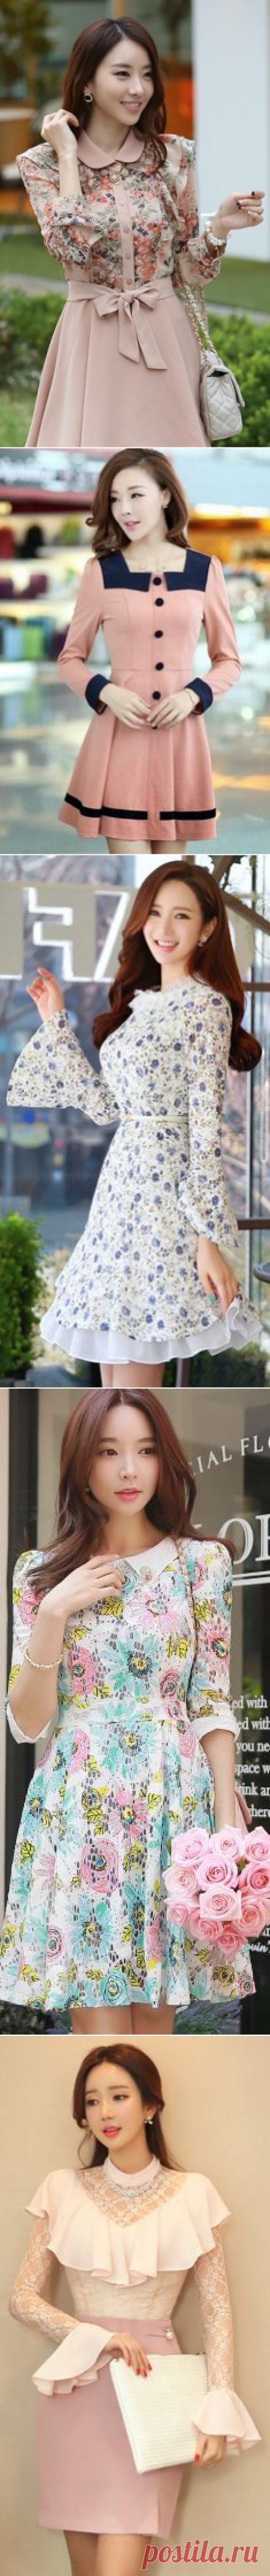 Cute Light Pink Floral Top Dress | Great Outfits | Floral, Lights and Korean fashion